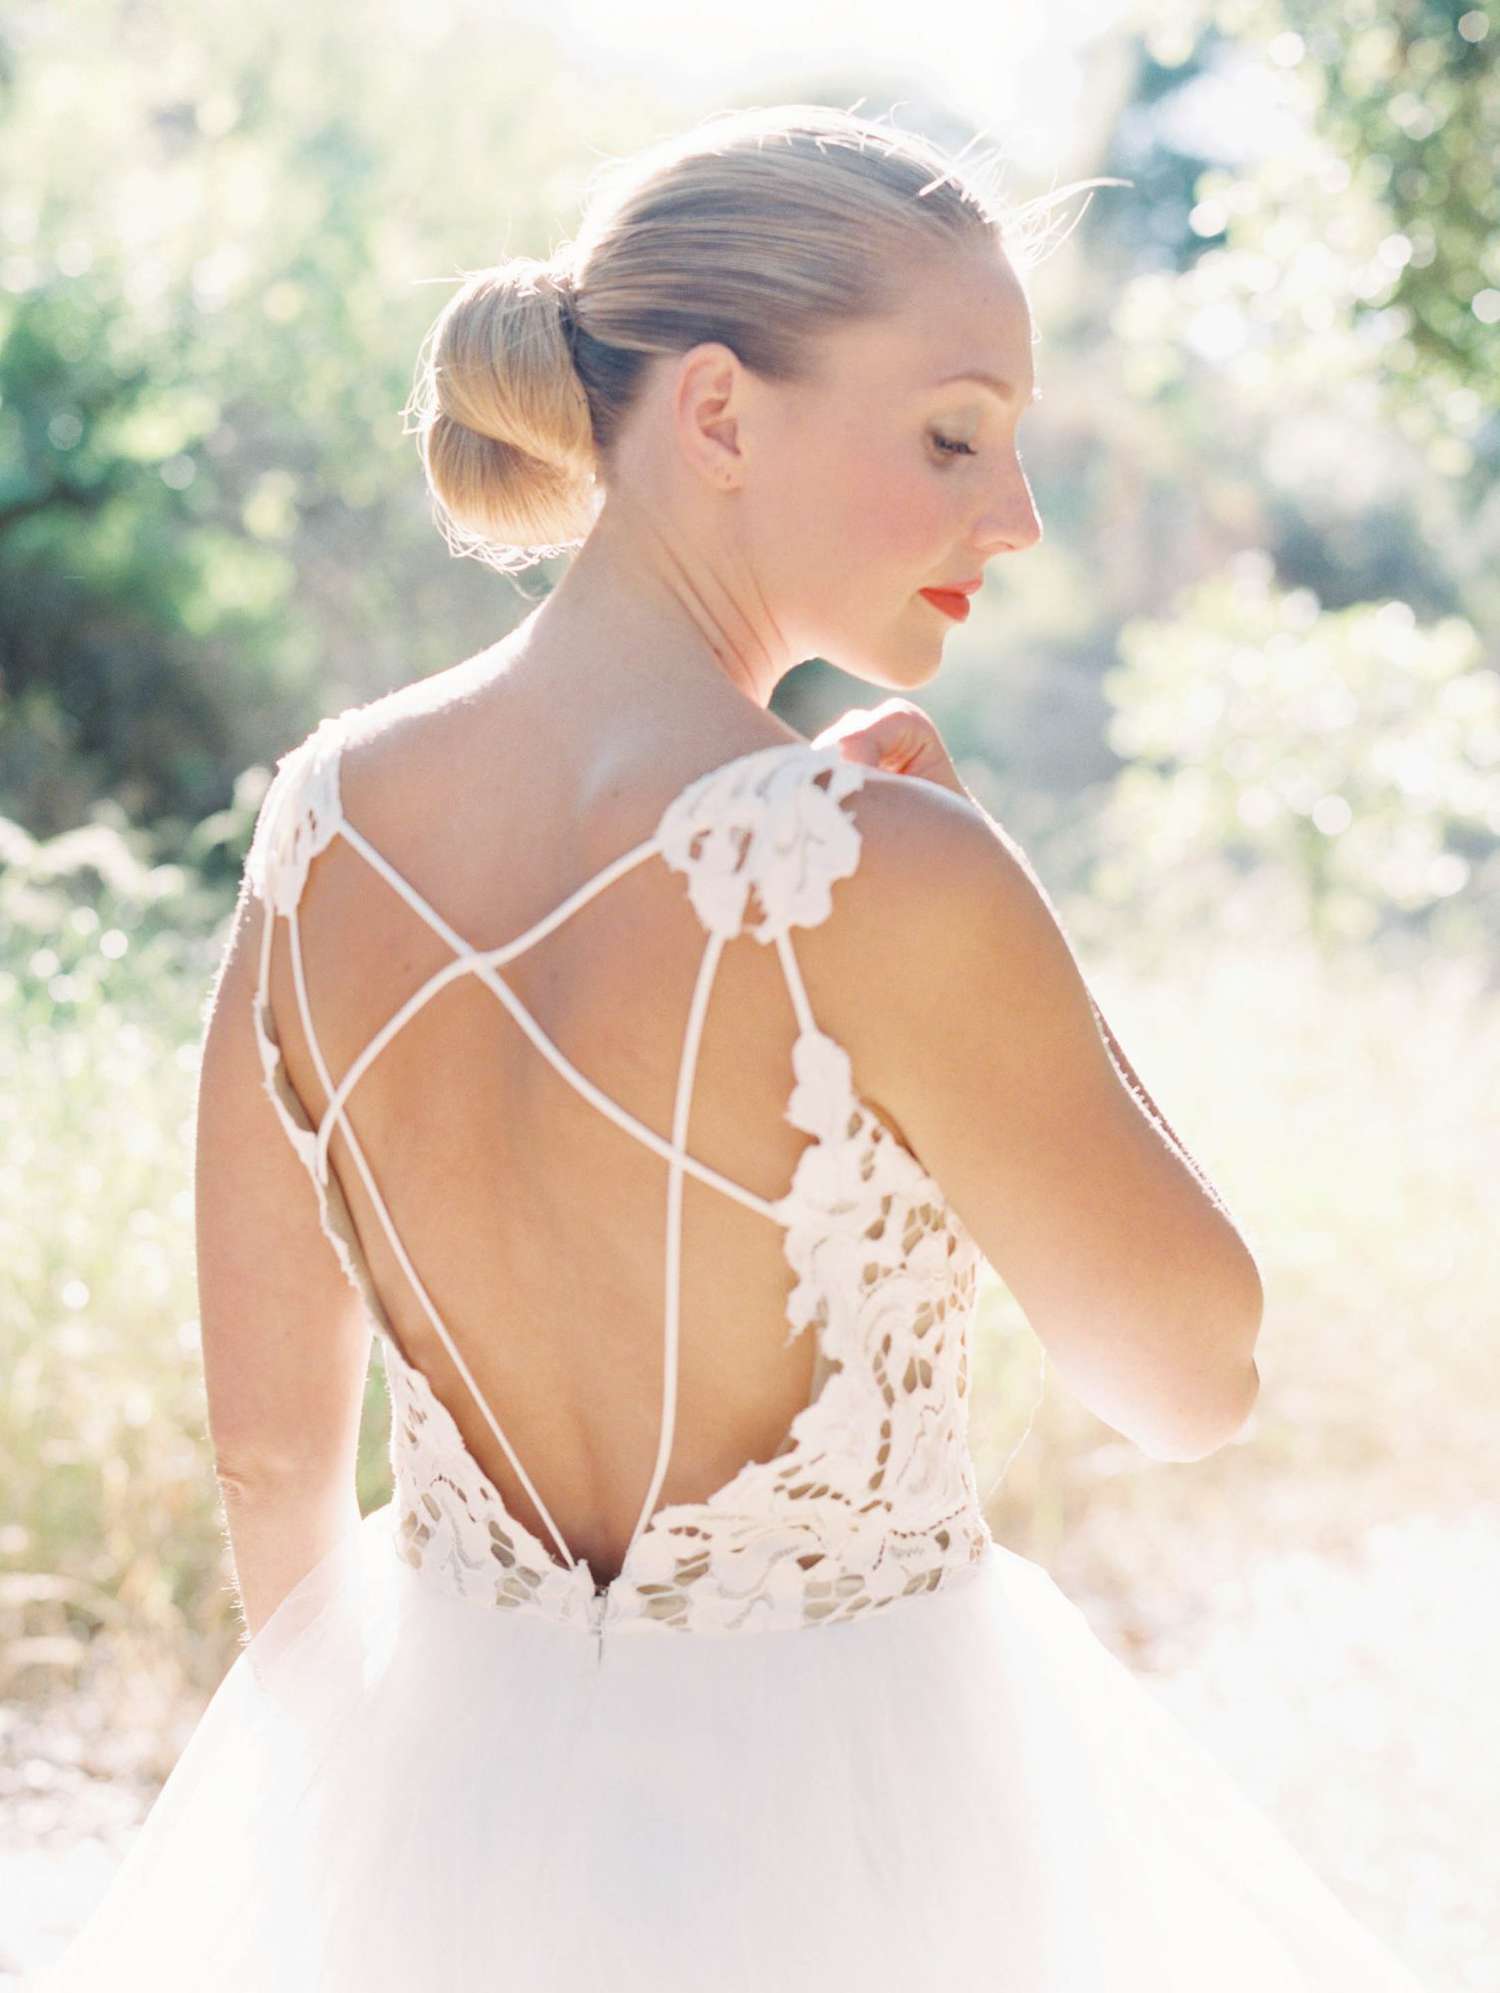 A Bride with a Wedding Dress That Features Lined Back Details